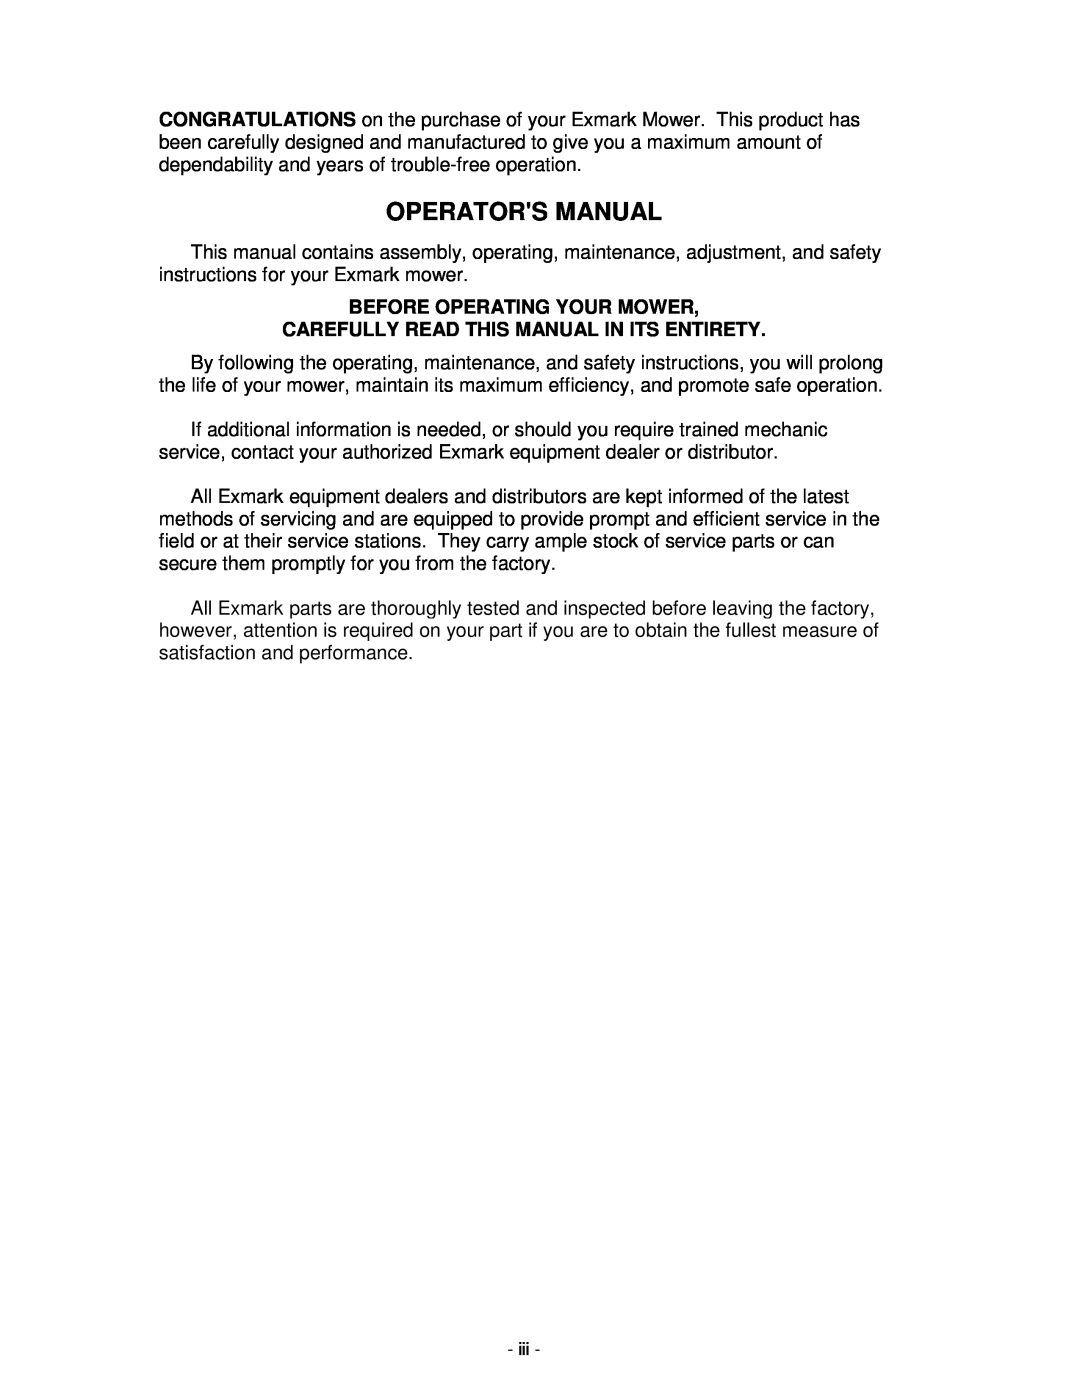 Exmark Lazer Z XP manual Operators Manual, Before Operating Your Mower, Carefully Read This Manual In Its Entirety 